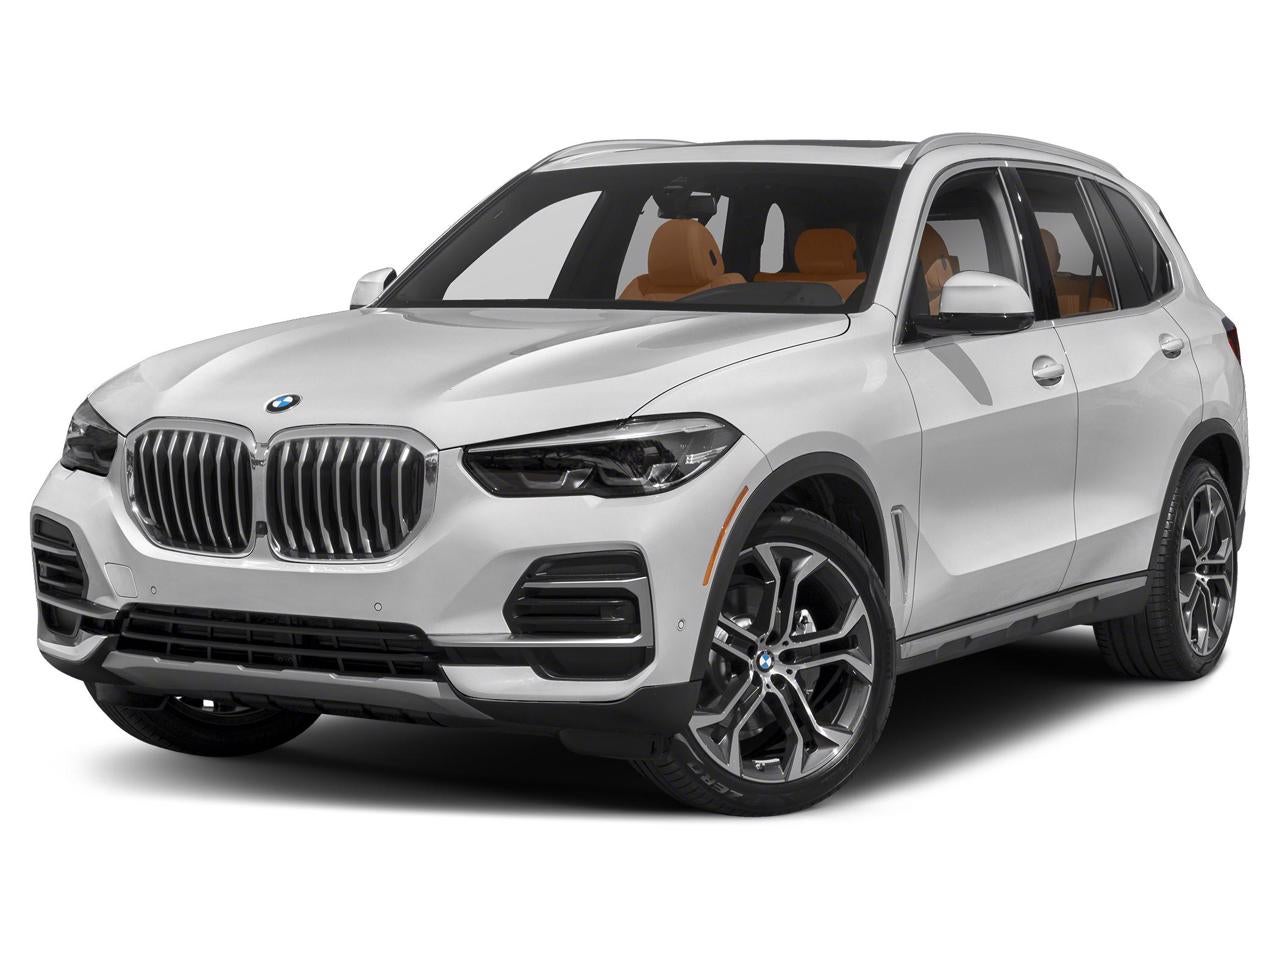 The X5